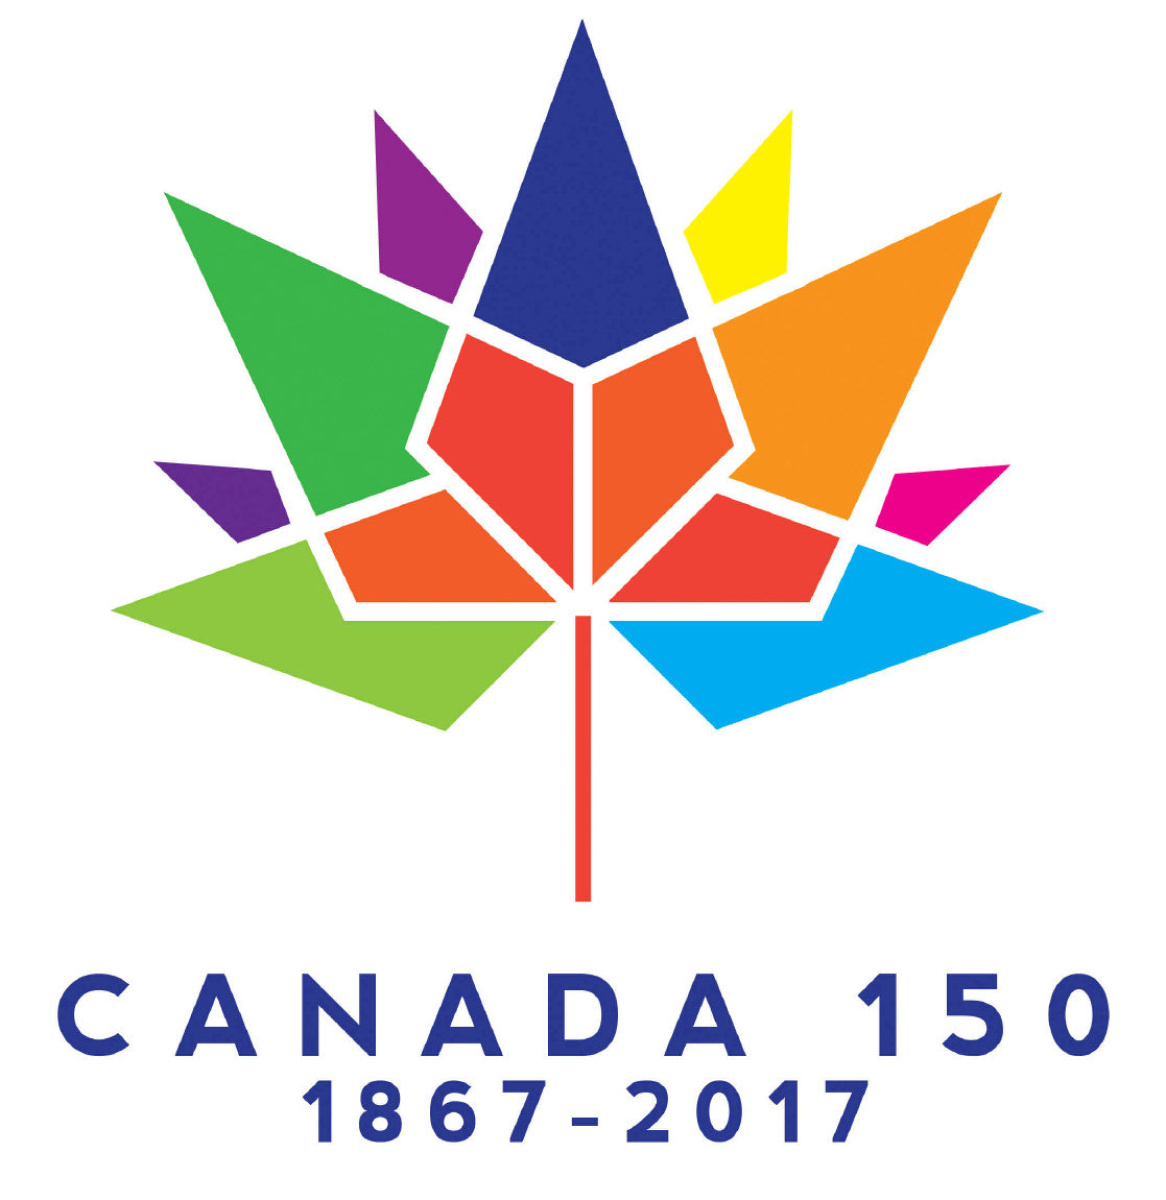 Canada 150 Logo designed by University of Waterloo student Ariana Cuvin circa April 2015 Google image from https://www.thestar.com/news/canada/2015/04/28/controversial-canada-150-logo-design-contest-won-by-university-of-waterloo-student.html